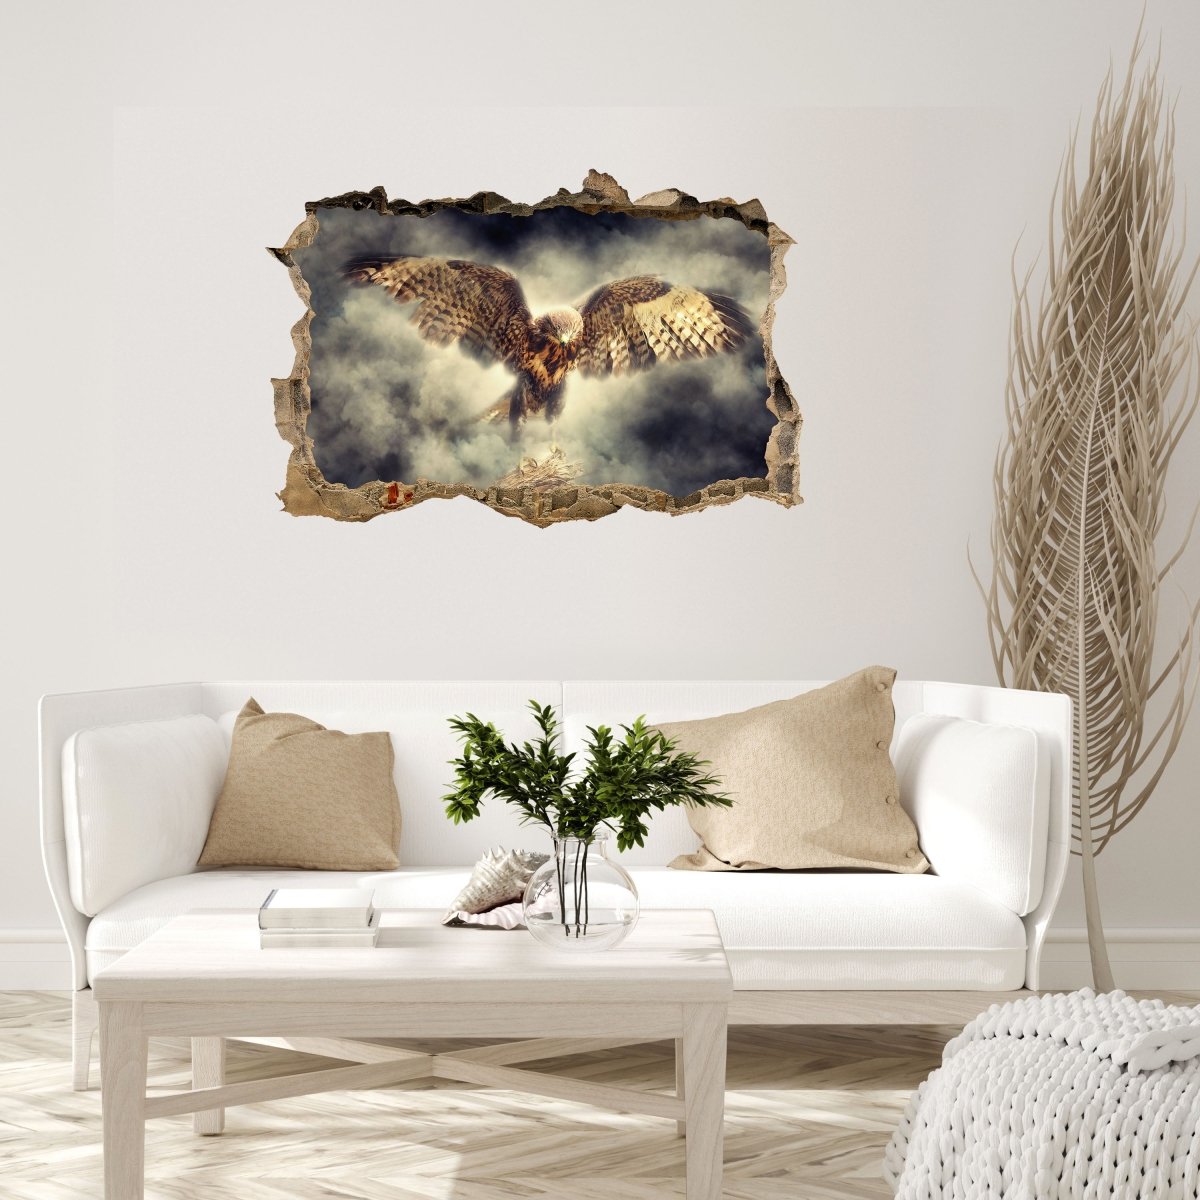 3D wall sticker eagle in the smoke, bird, feathers, gloomy - Wall Decal M1260